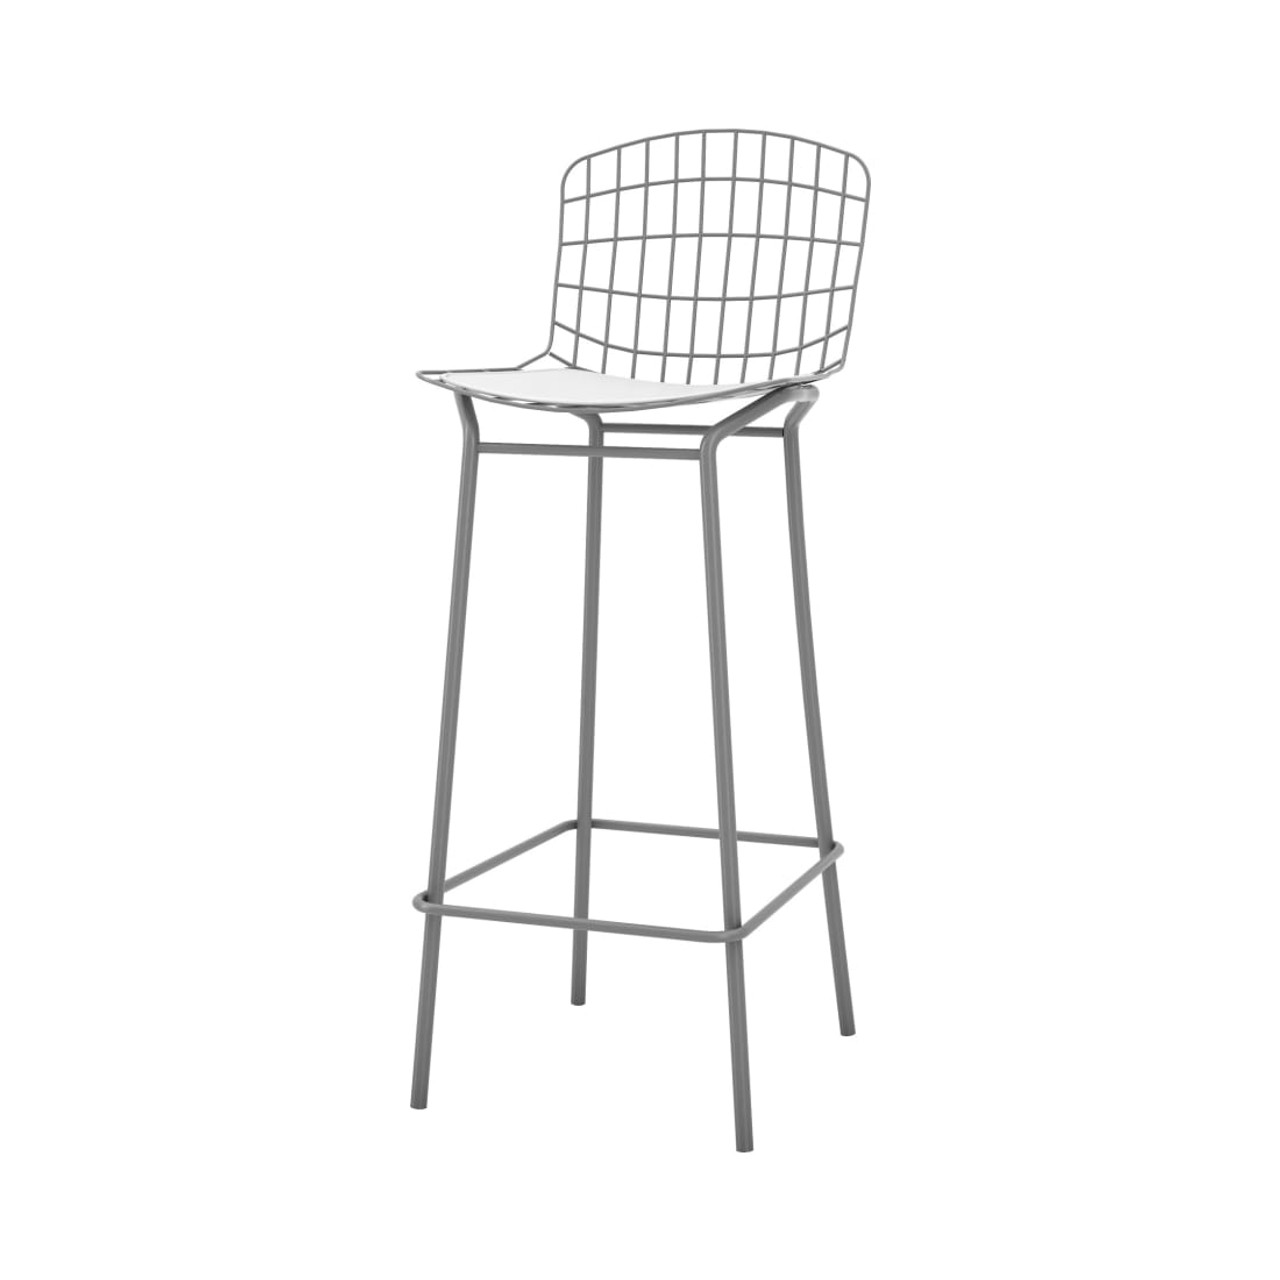 Madeline Barstool in Charcoal Gray and White (Set of 3)